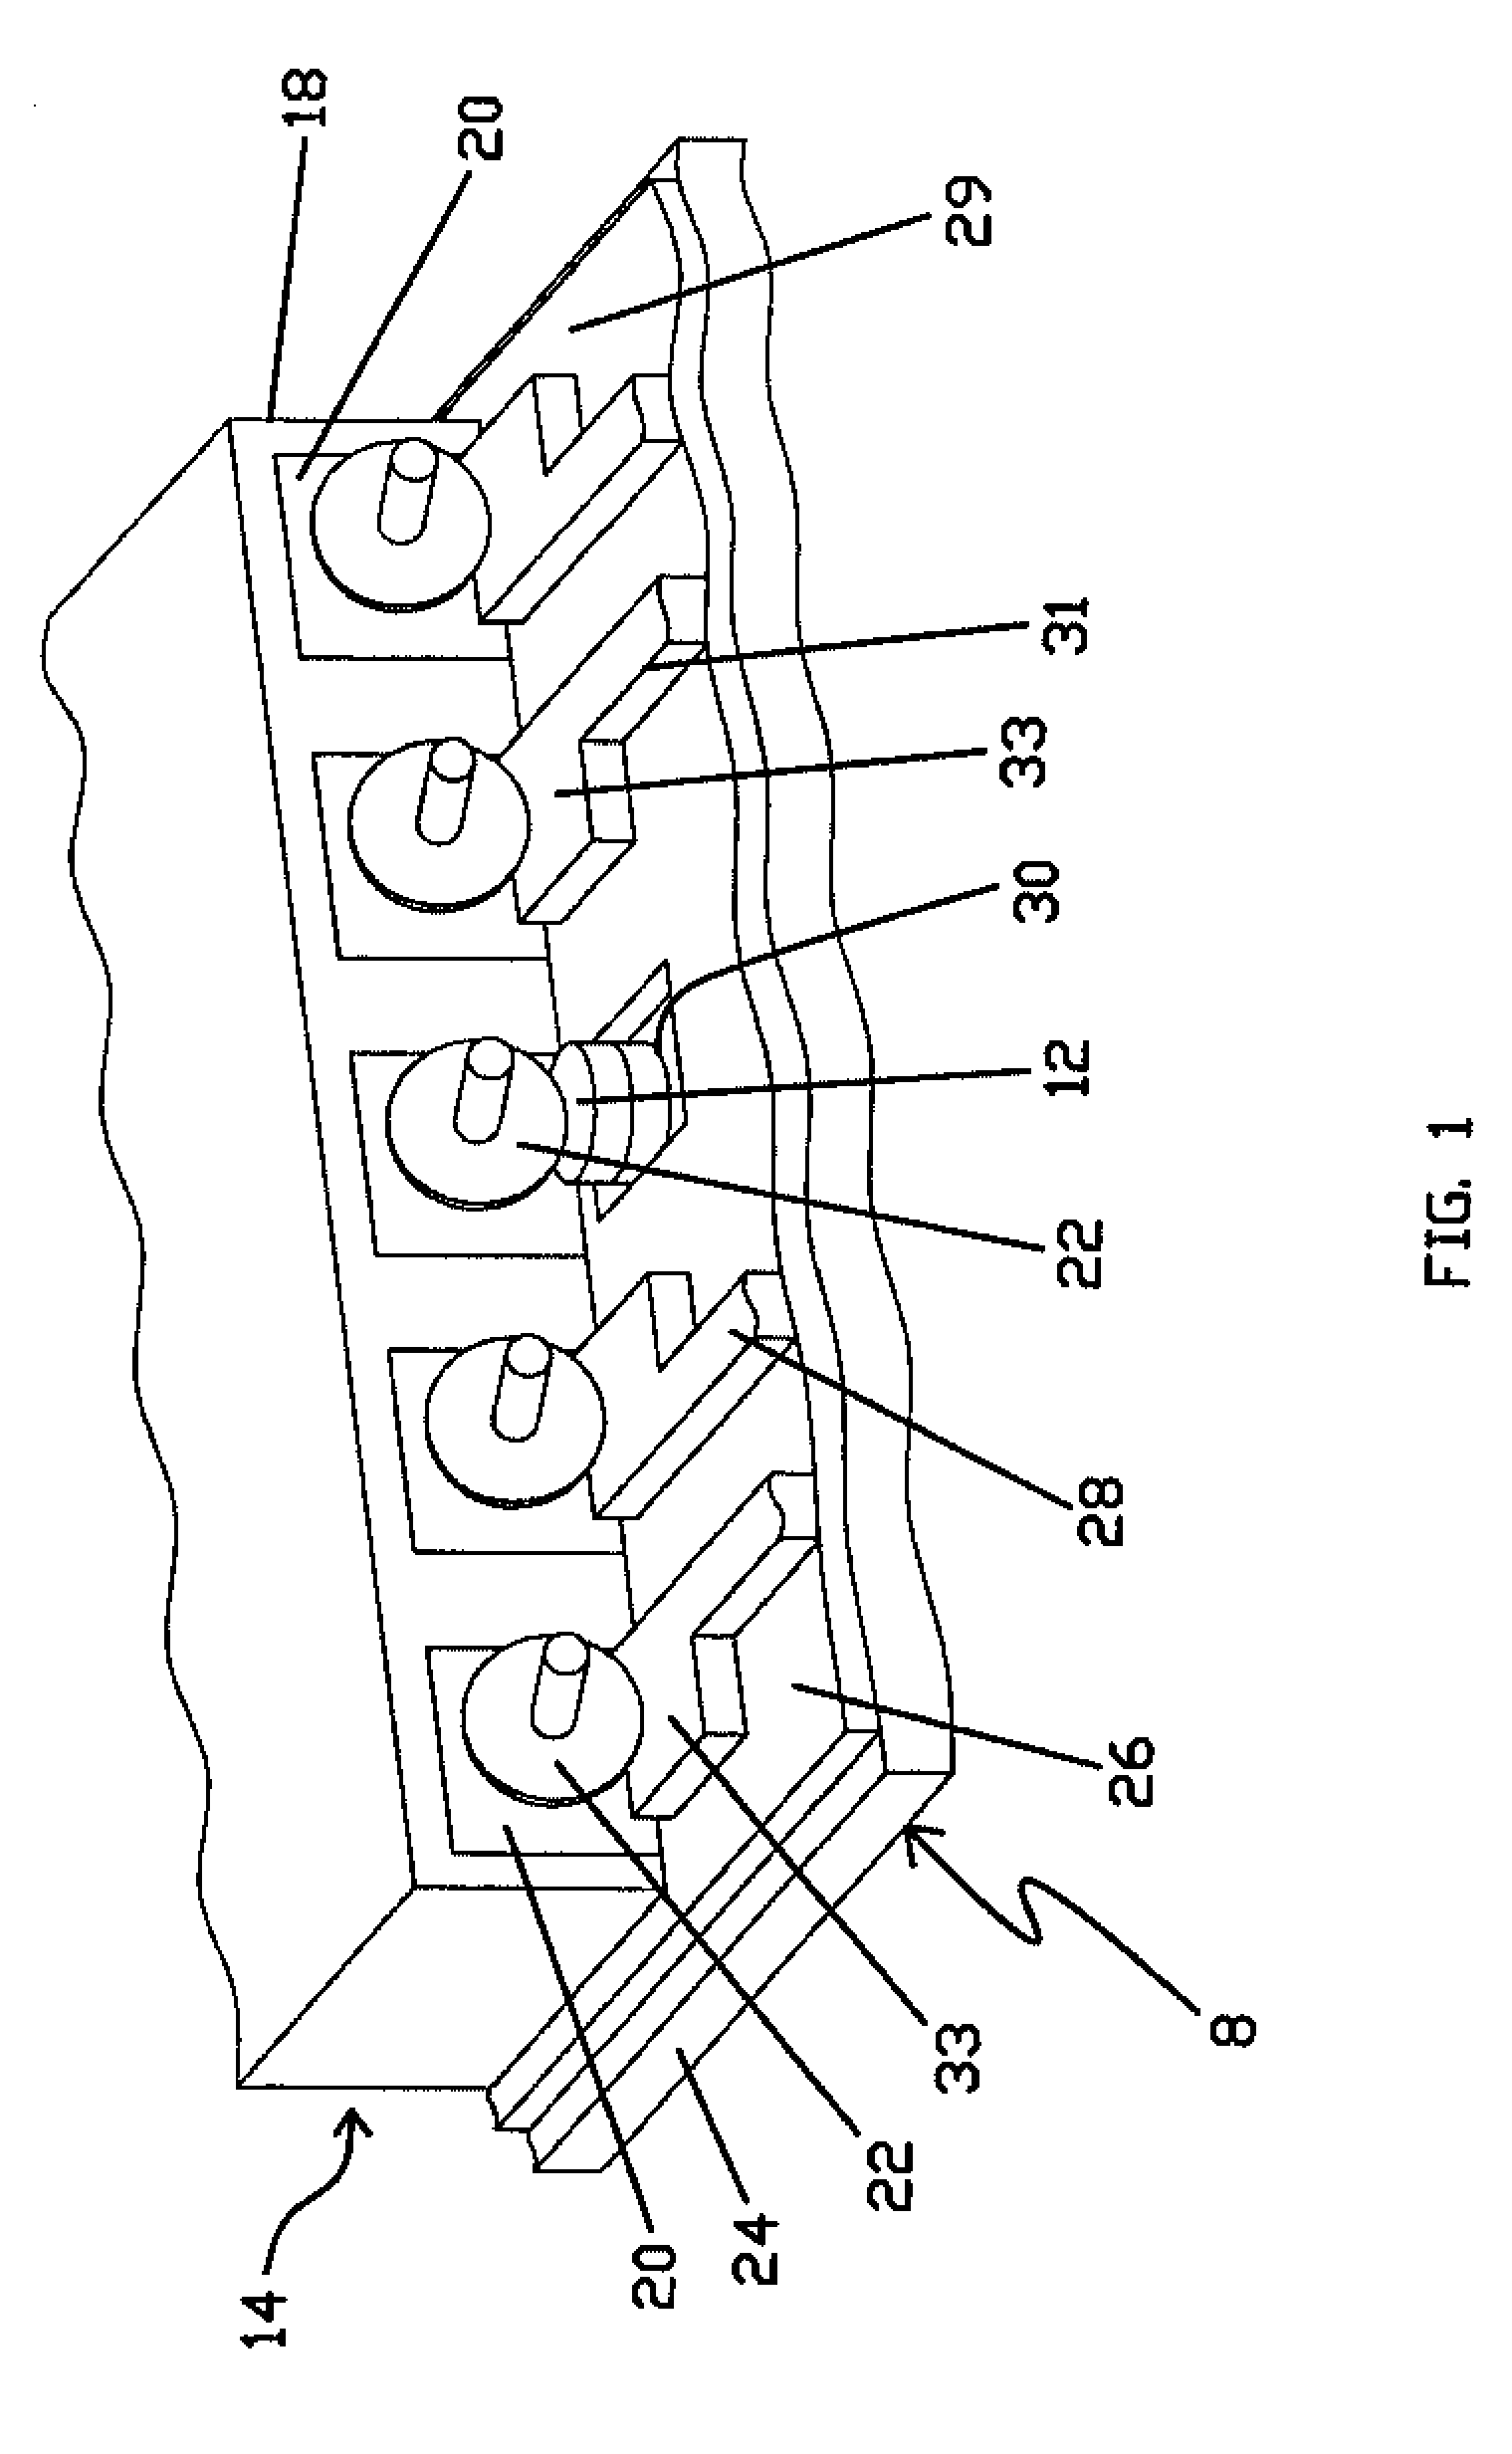 Method for forming an electrical interconnect to a spring layer in an integrated lead suspension